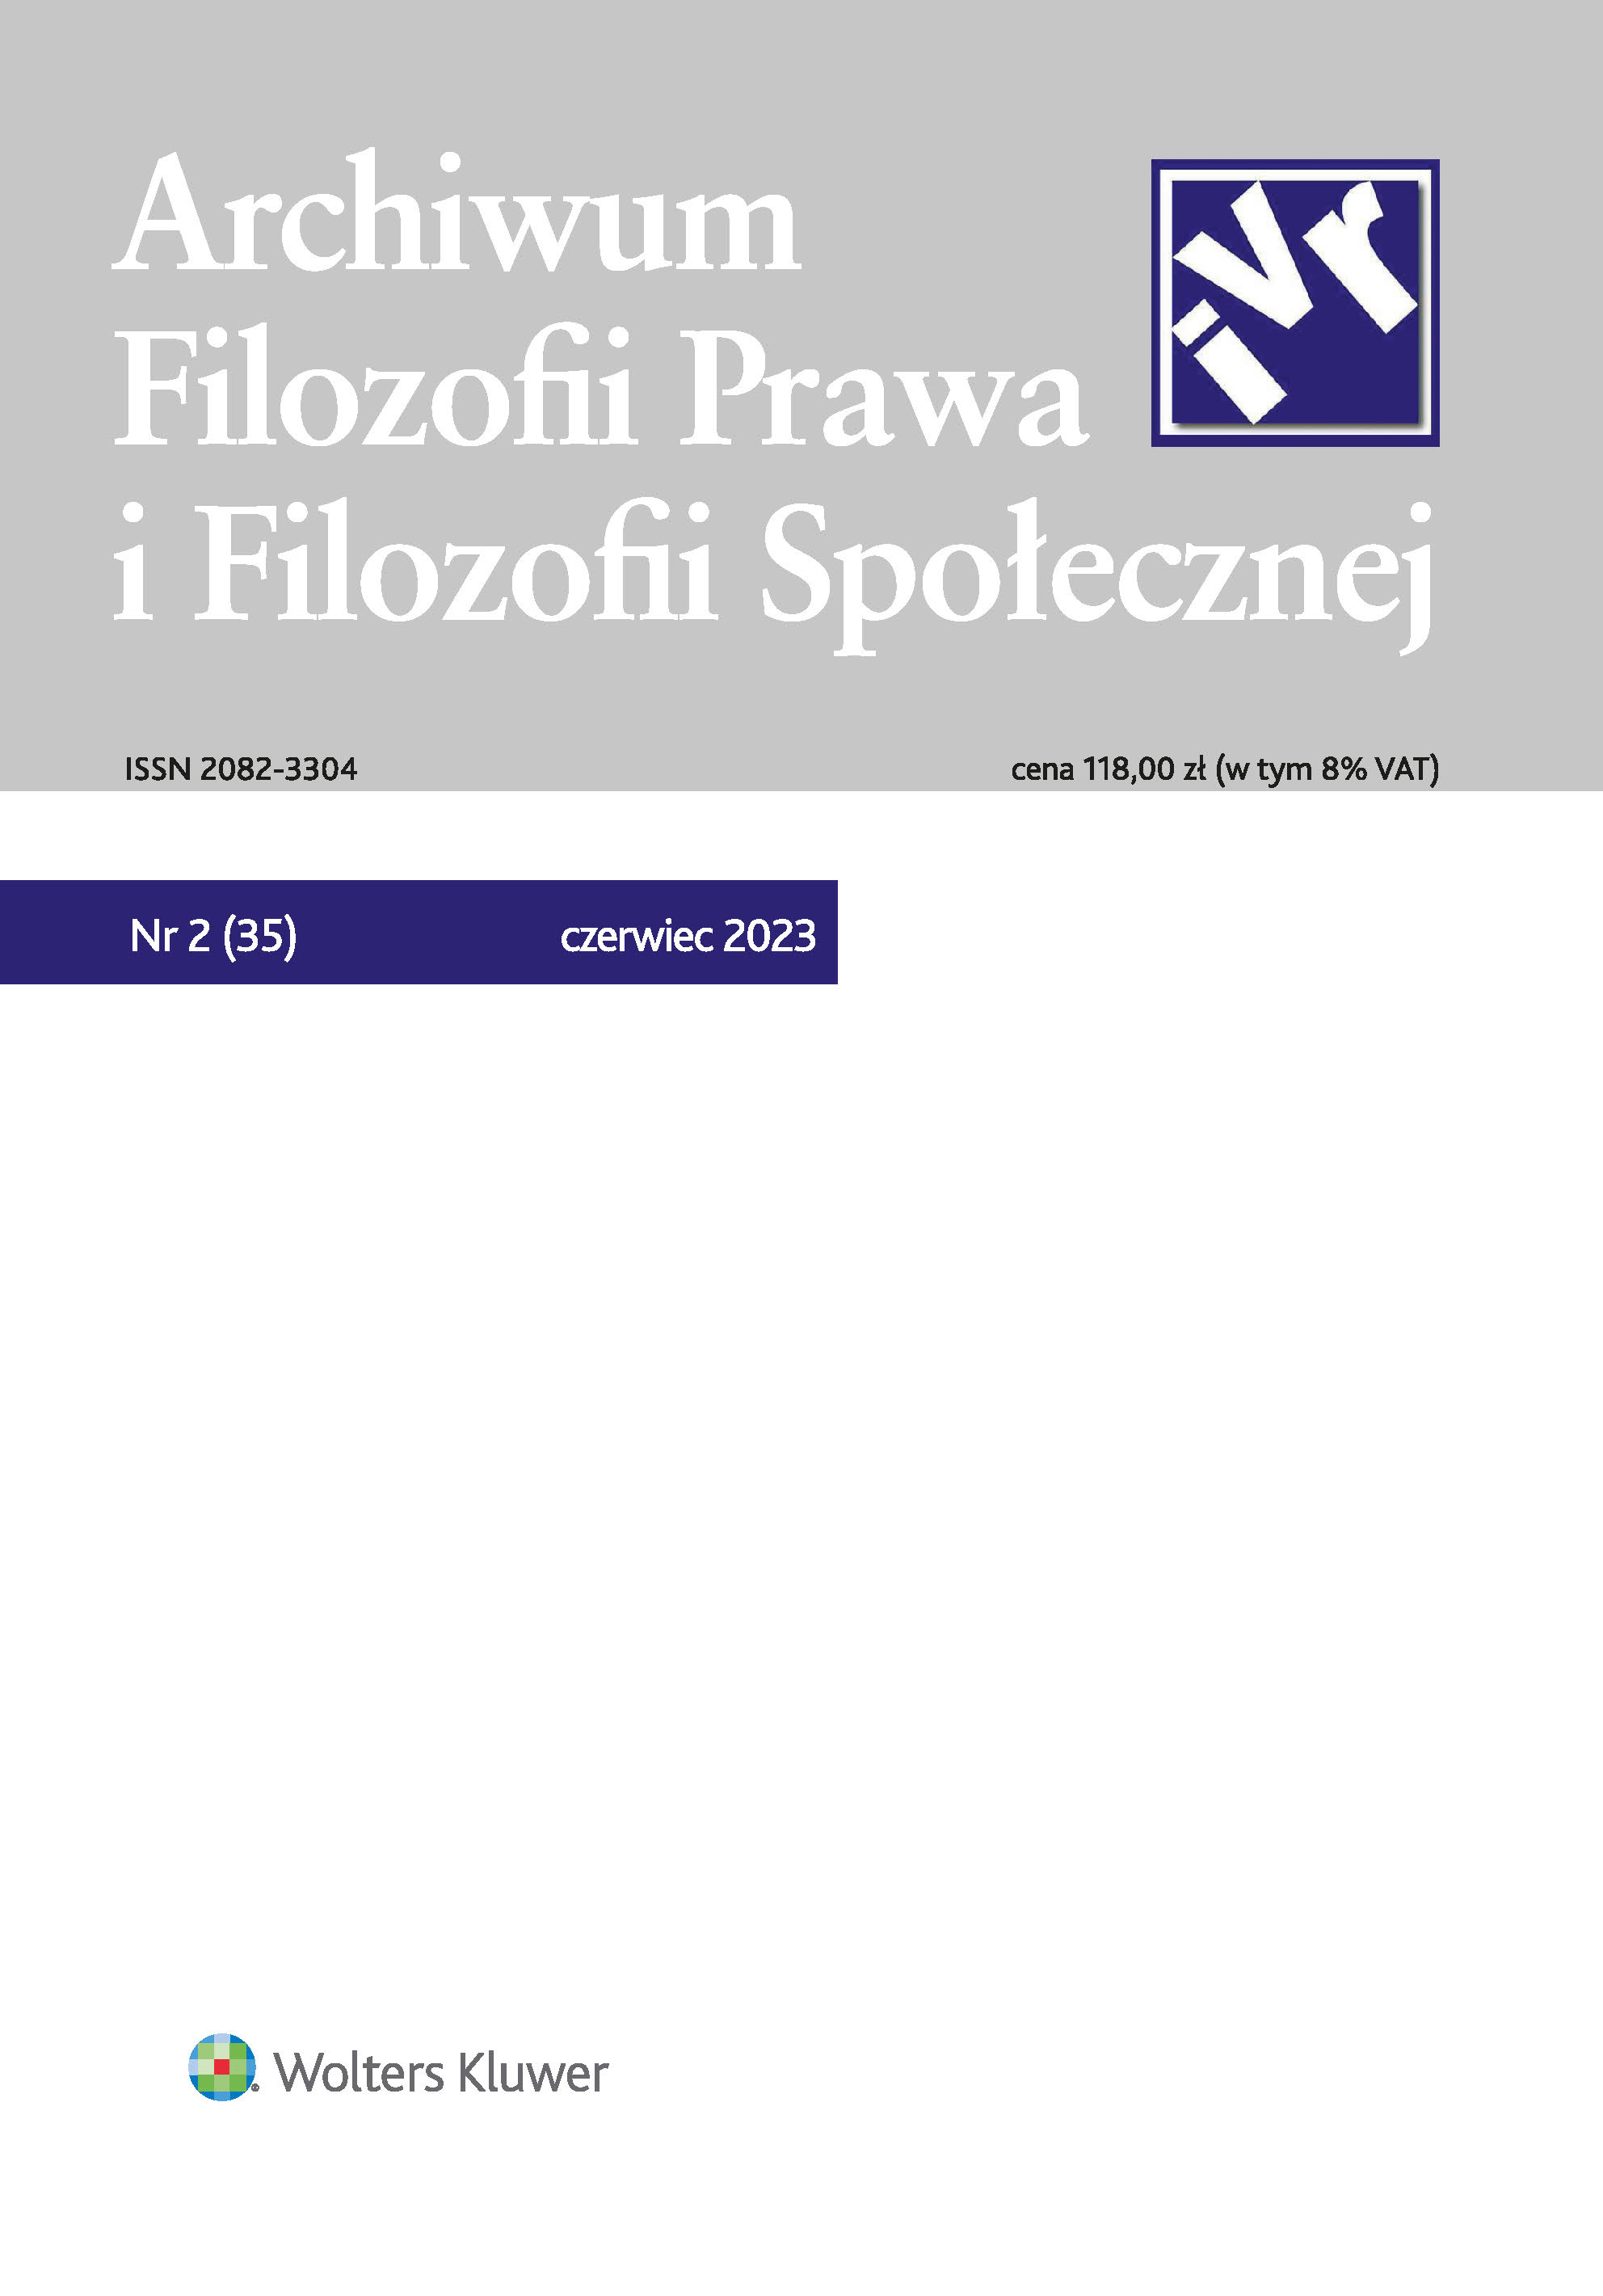 An Ideal of Scientific Jurisprudence. Józef Nowacki Against Ideological Influences
on Jurisprudential Claims Cover Image